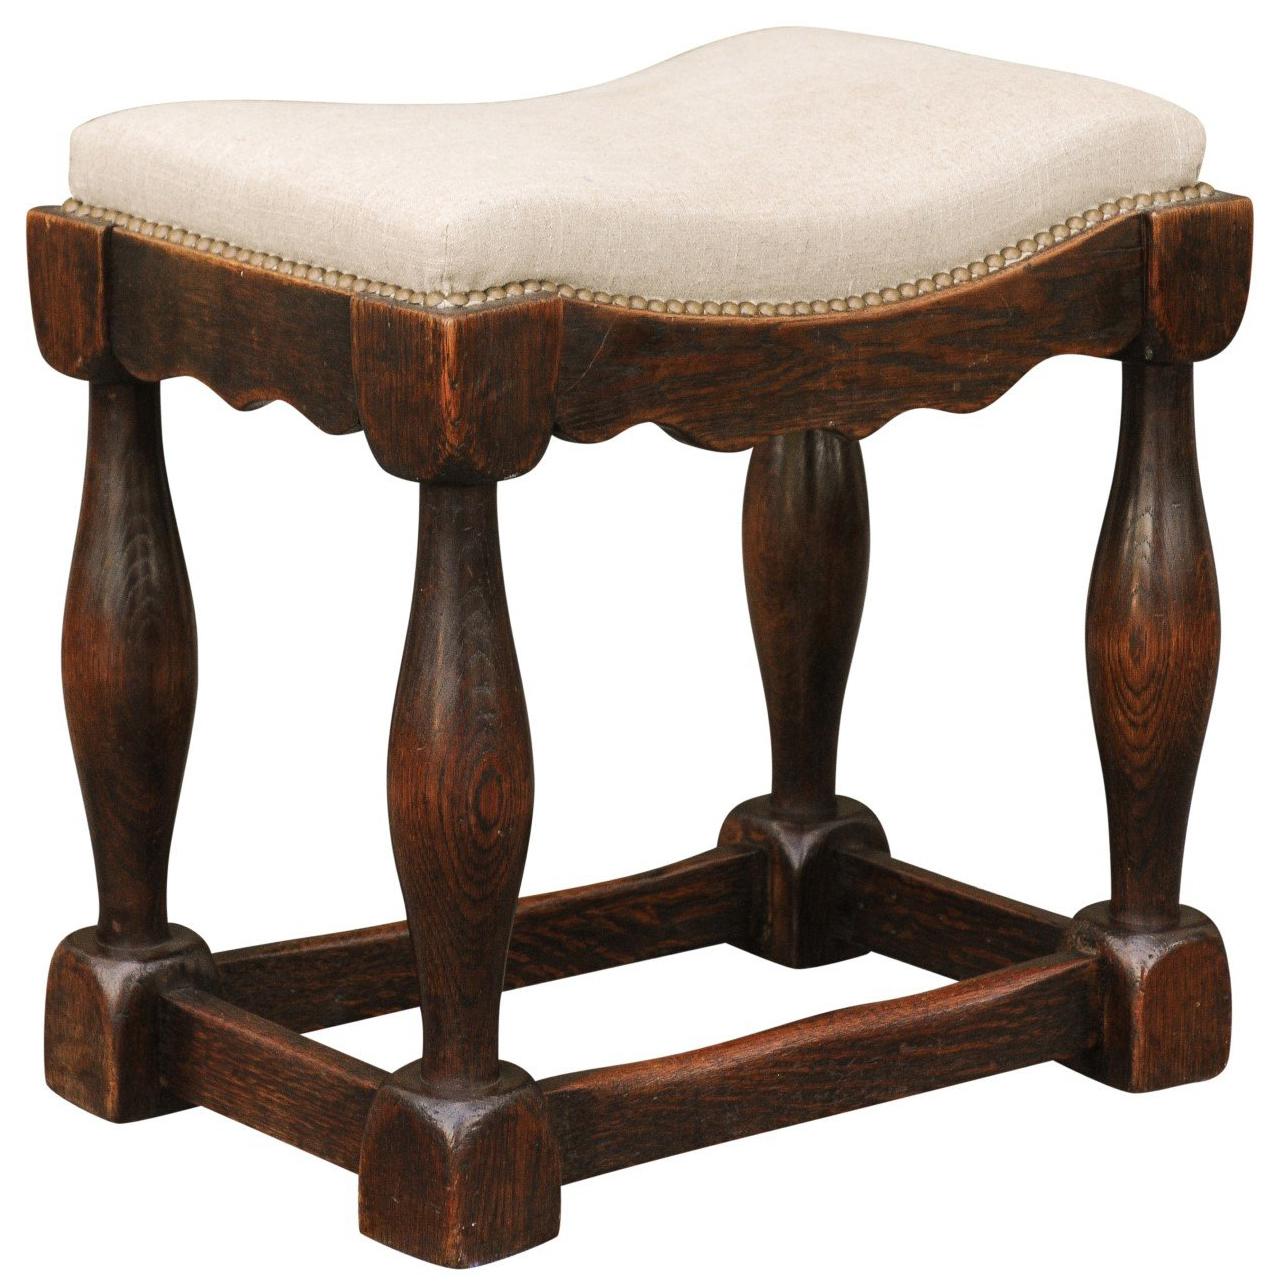 English 1820s Oak Saddle Seat Stool with Baluster Legs and New Upholstery